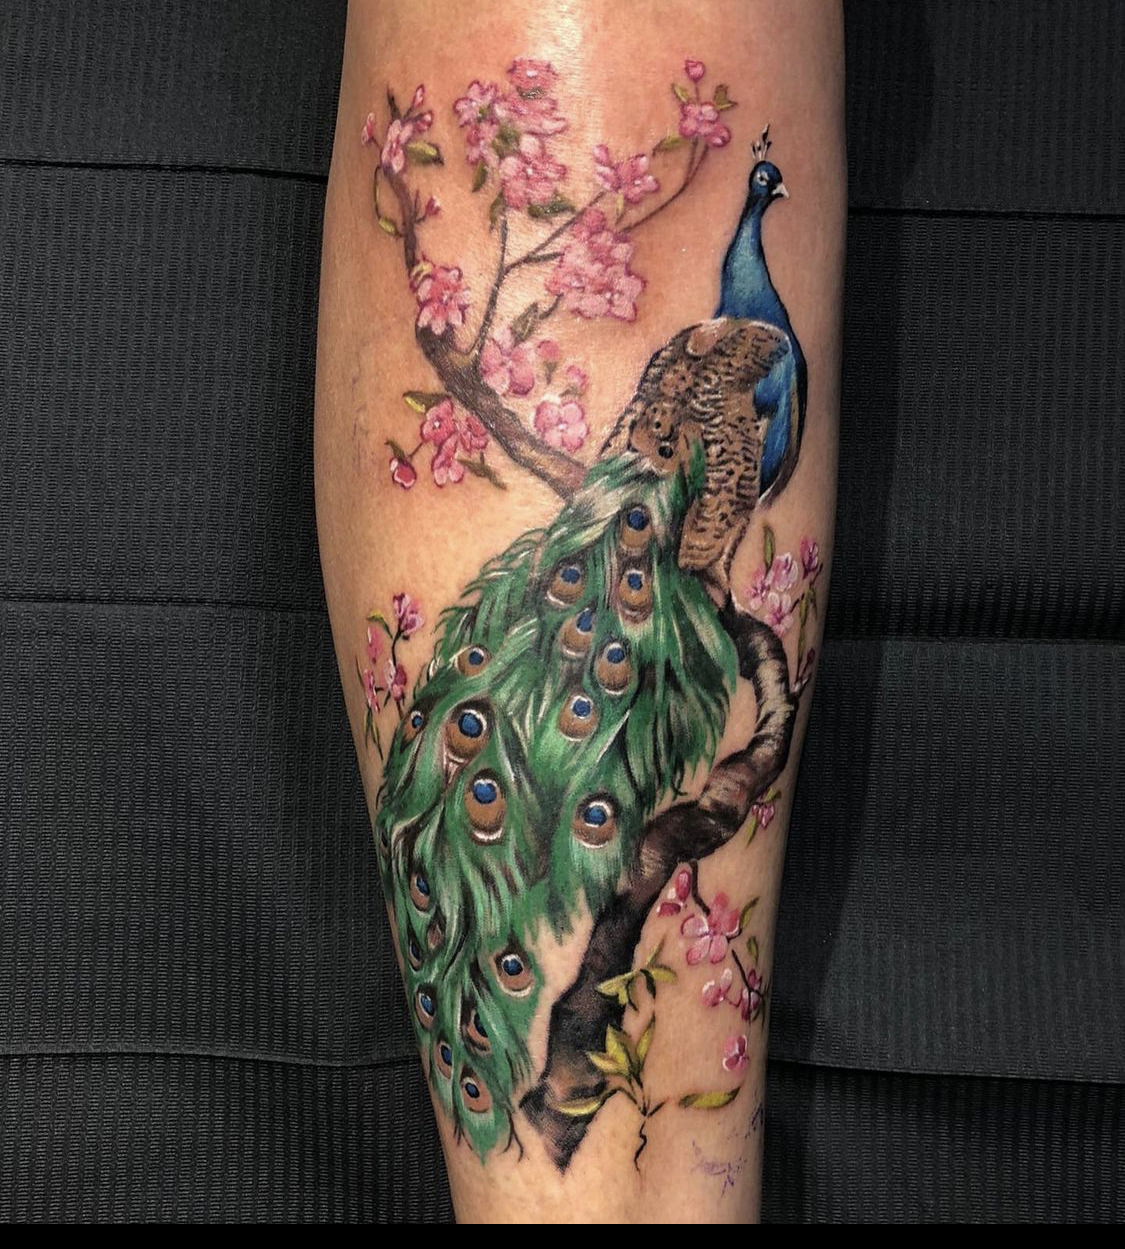 Creatures from the orient, including a peacock, feature in this geometric  and colorful tattoo by Amanda Chamfreau | Ratta Tattoo